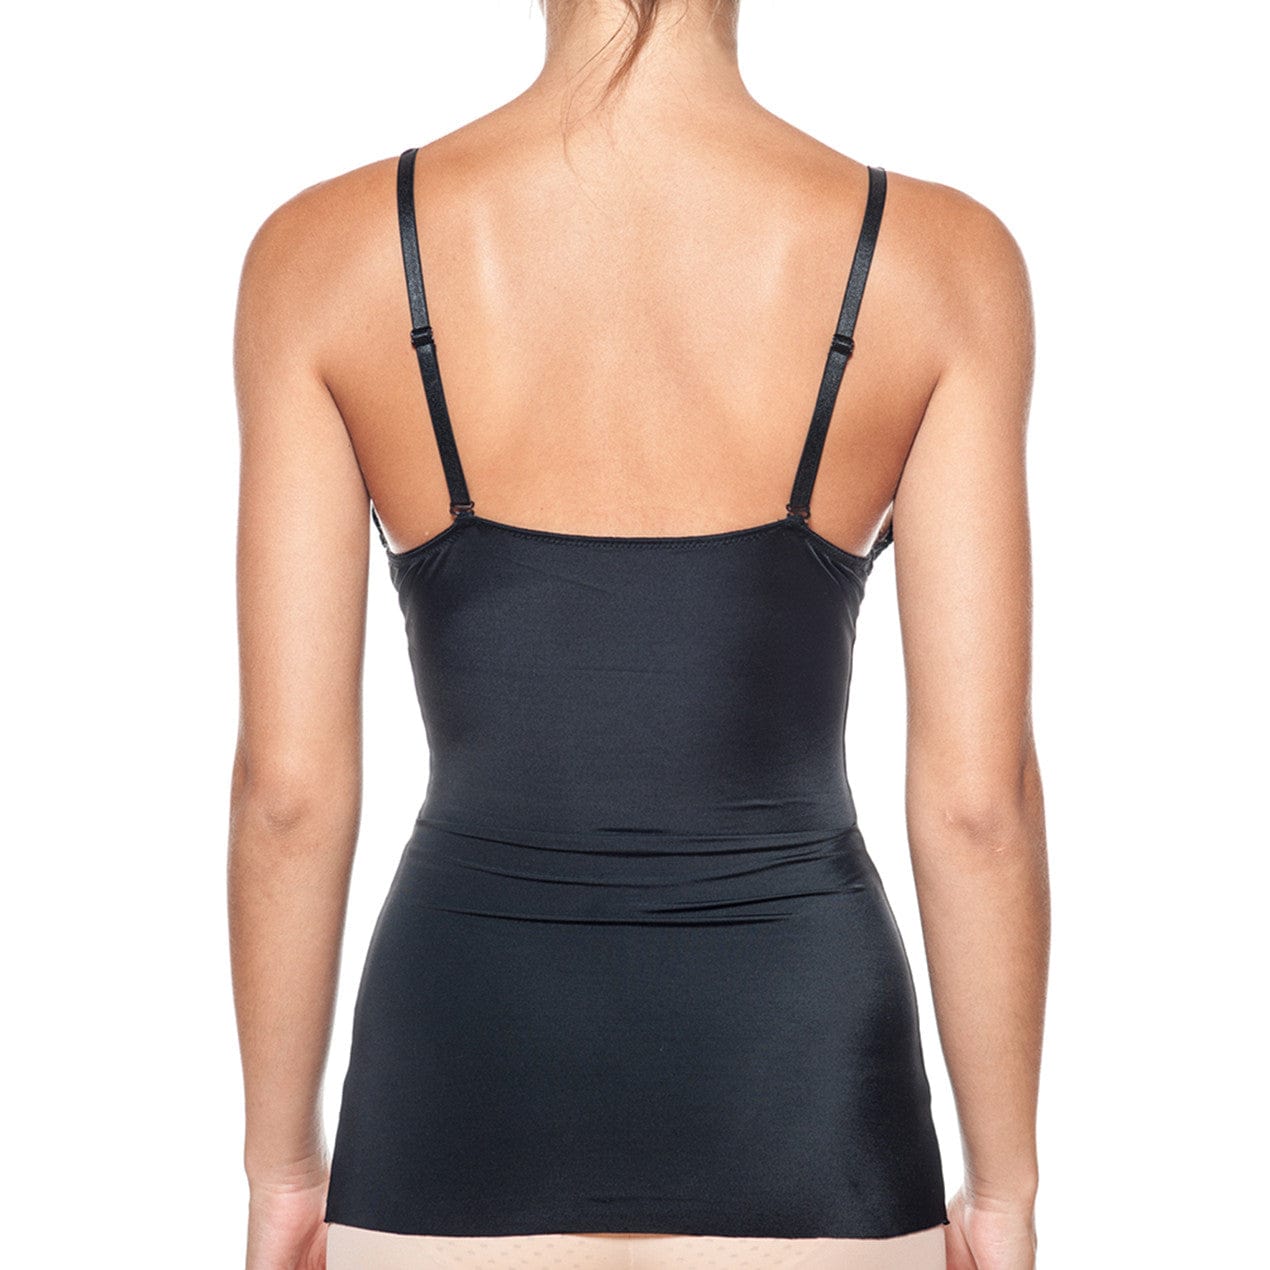 Smooth and Silky Bodysuit Shaper With Built-In Wire Bra and Lace Trims -  Himelhoch's Department Store